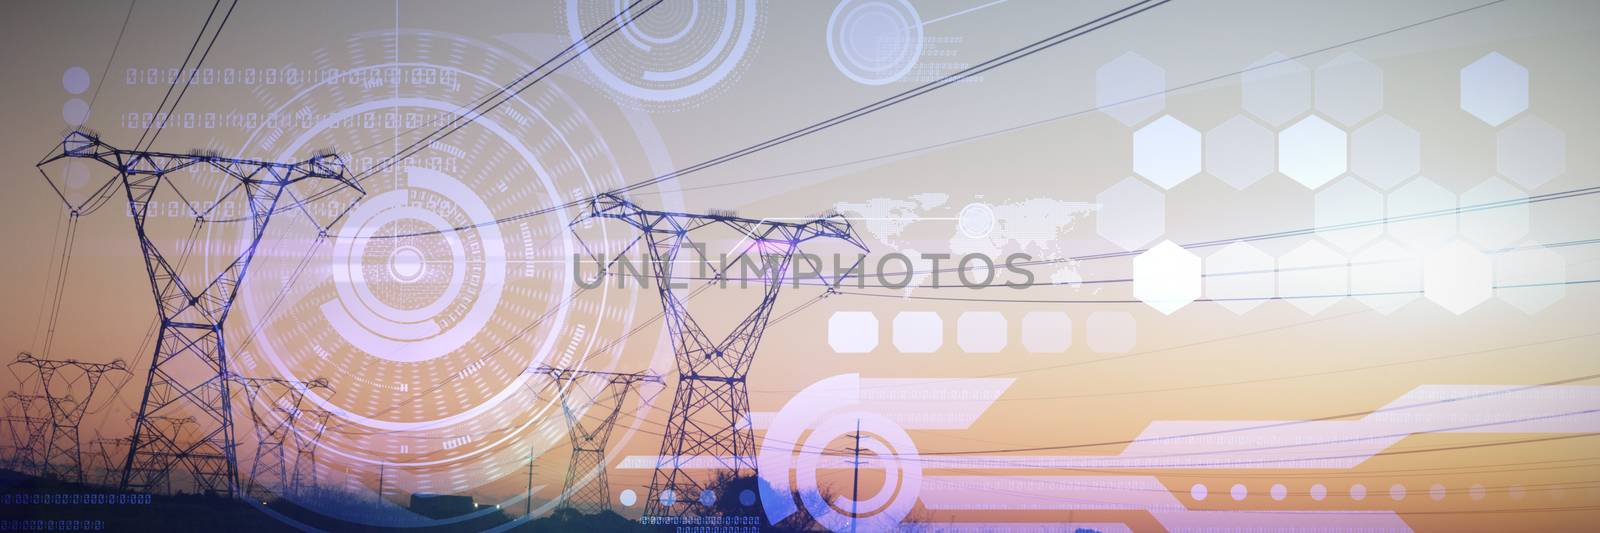 Composite image of the evening electricity pylon silhouette by Wavebreakmedia